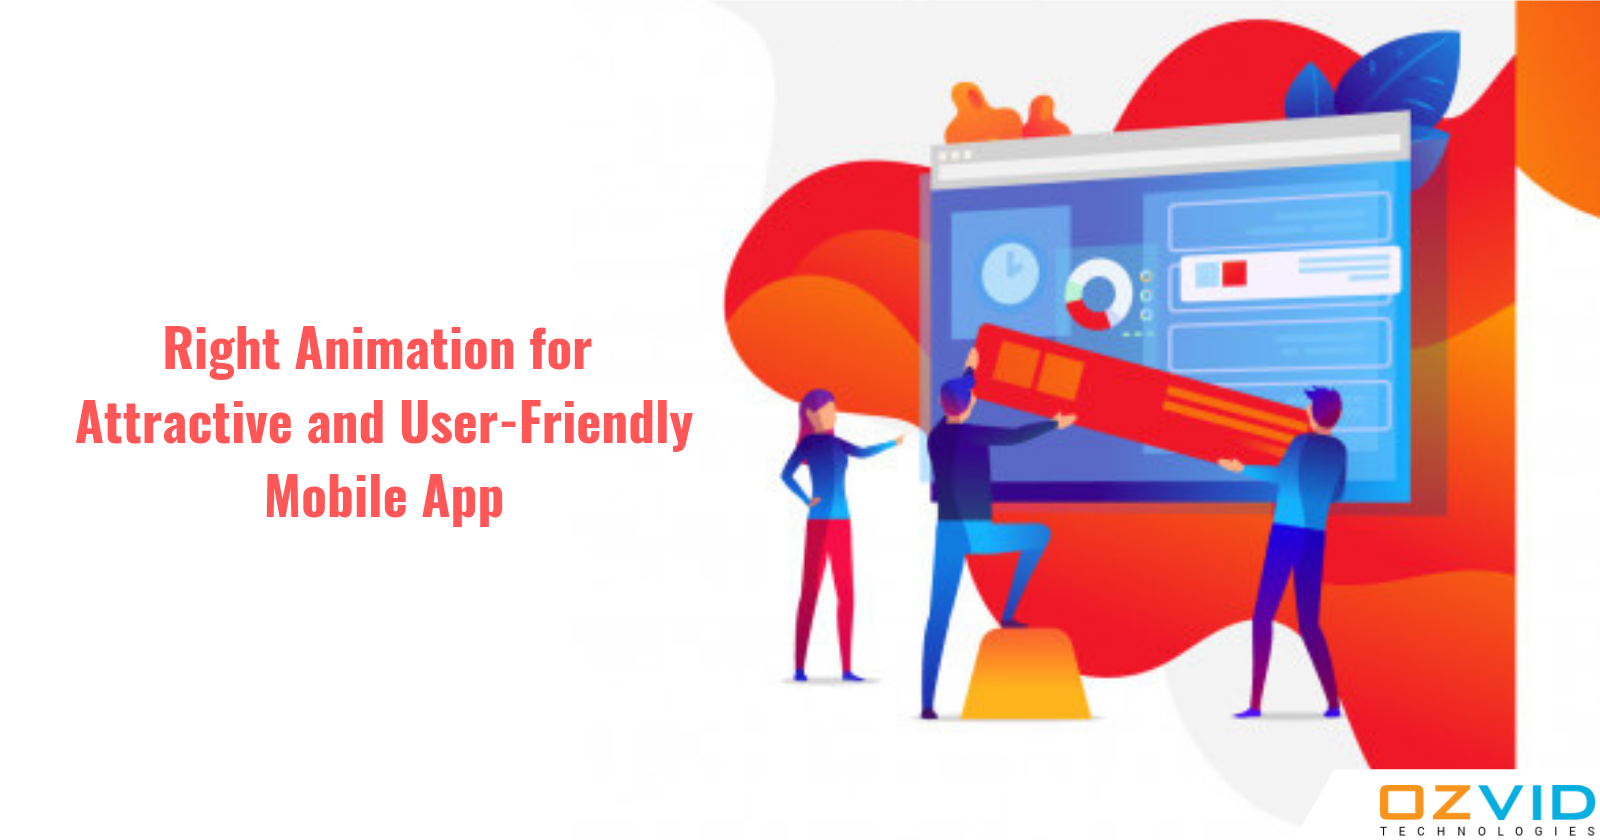 Make Your Mobile App Attractive and Lively with Right Animation